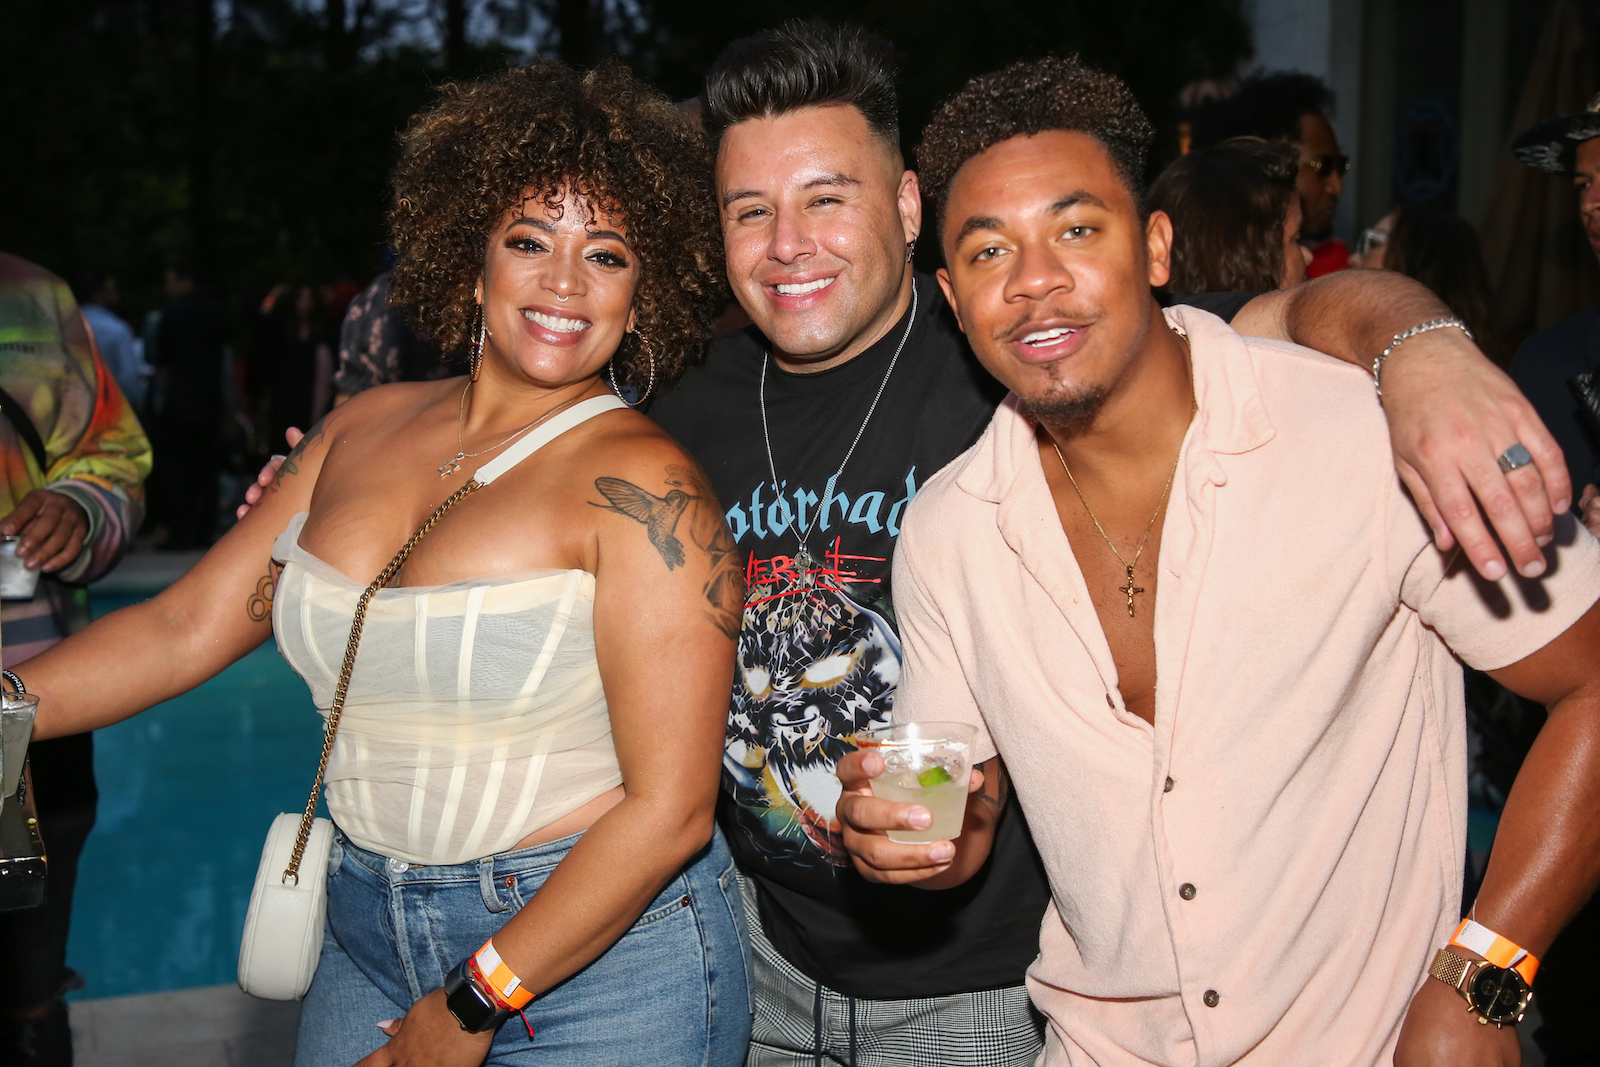 Reality TV personalities Aneesa Ferreira, Johnny Donovan, and Cameron Armstrong smiling while attending the Reality Rushmore: Paramount + MTV 'The Challenge' reunion event